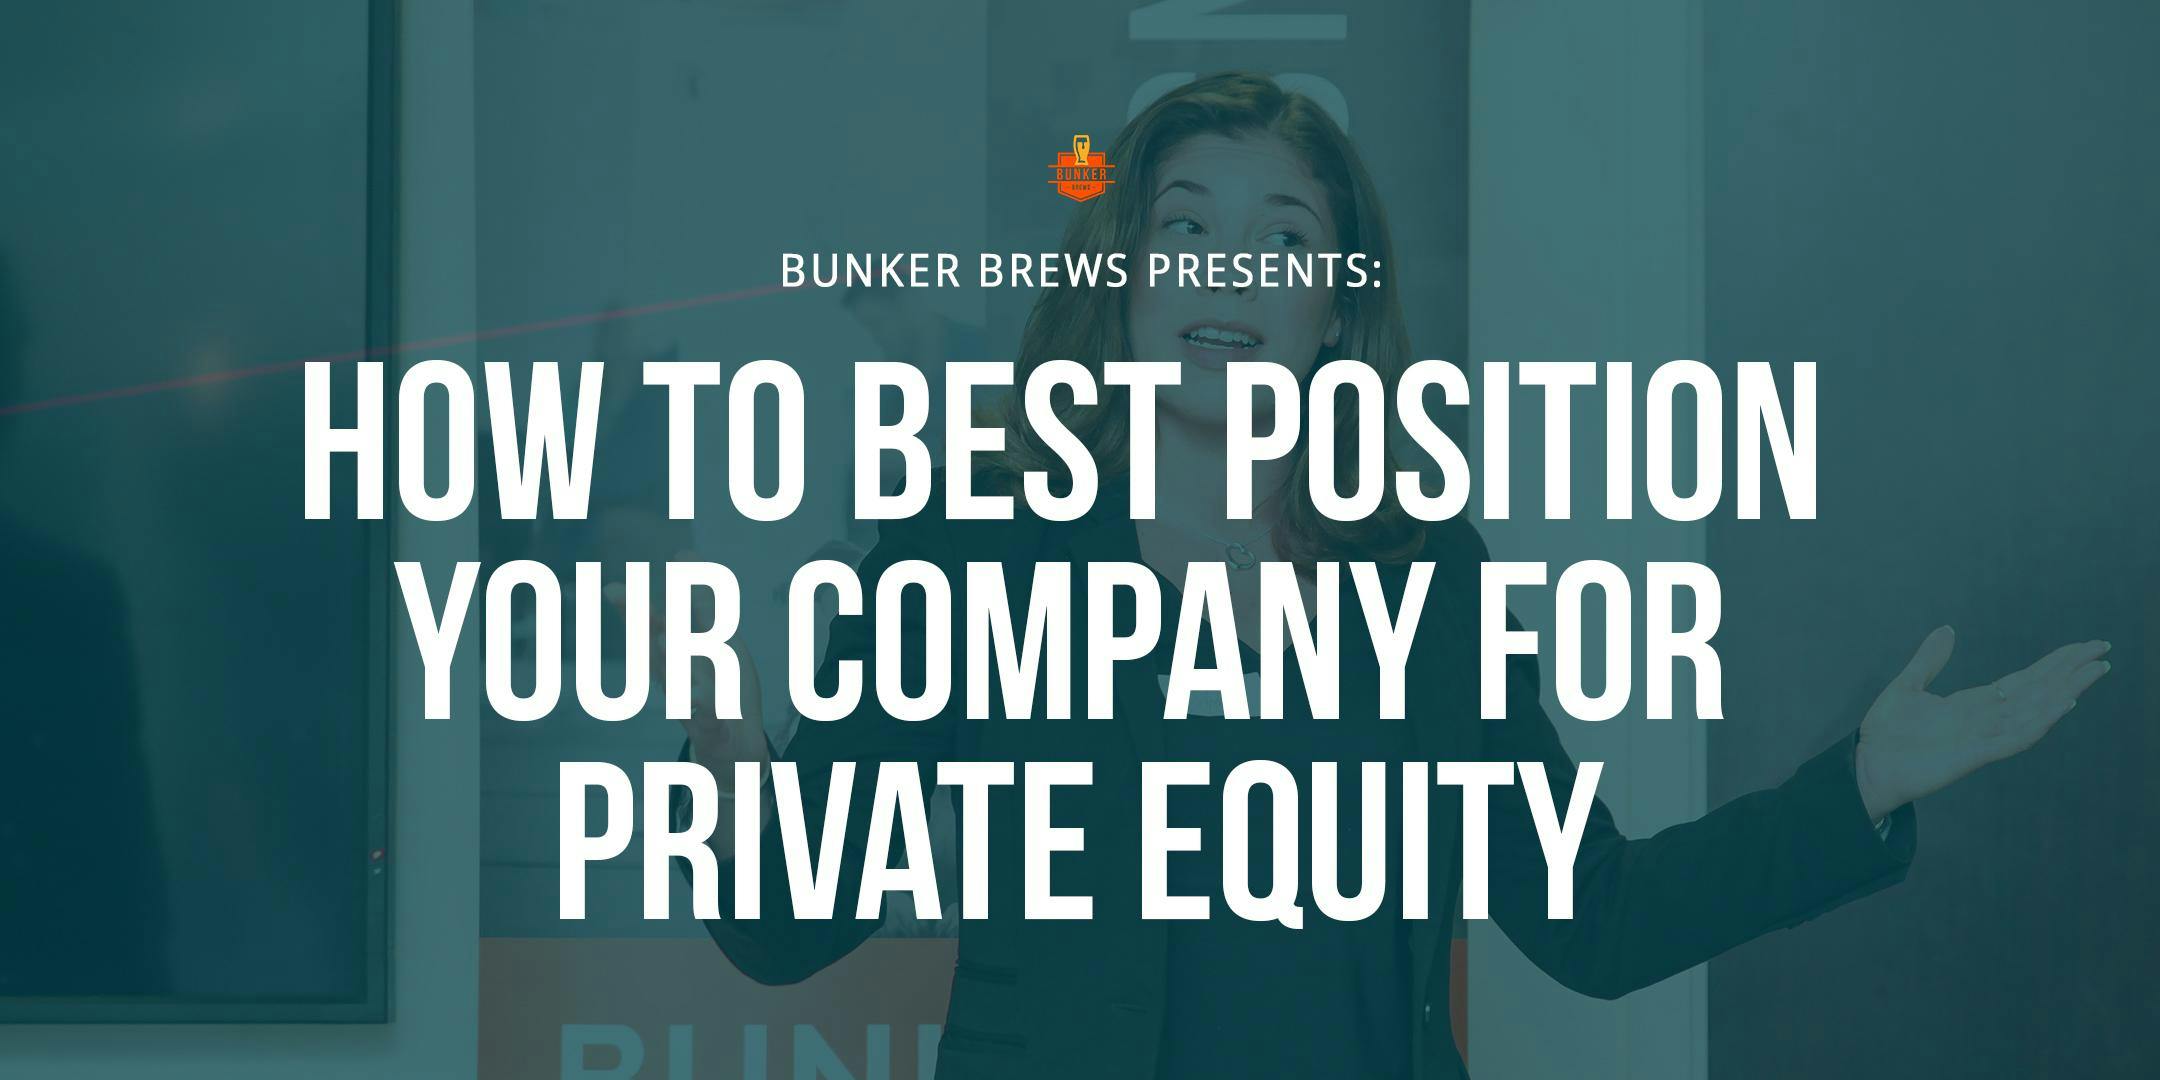 Bunker Brews NYC: How to Best Position Your Company for Private Equity